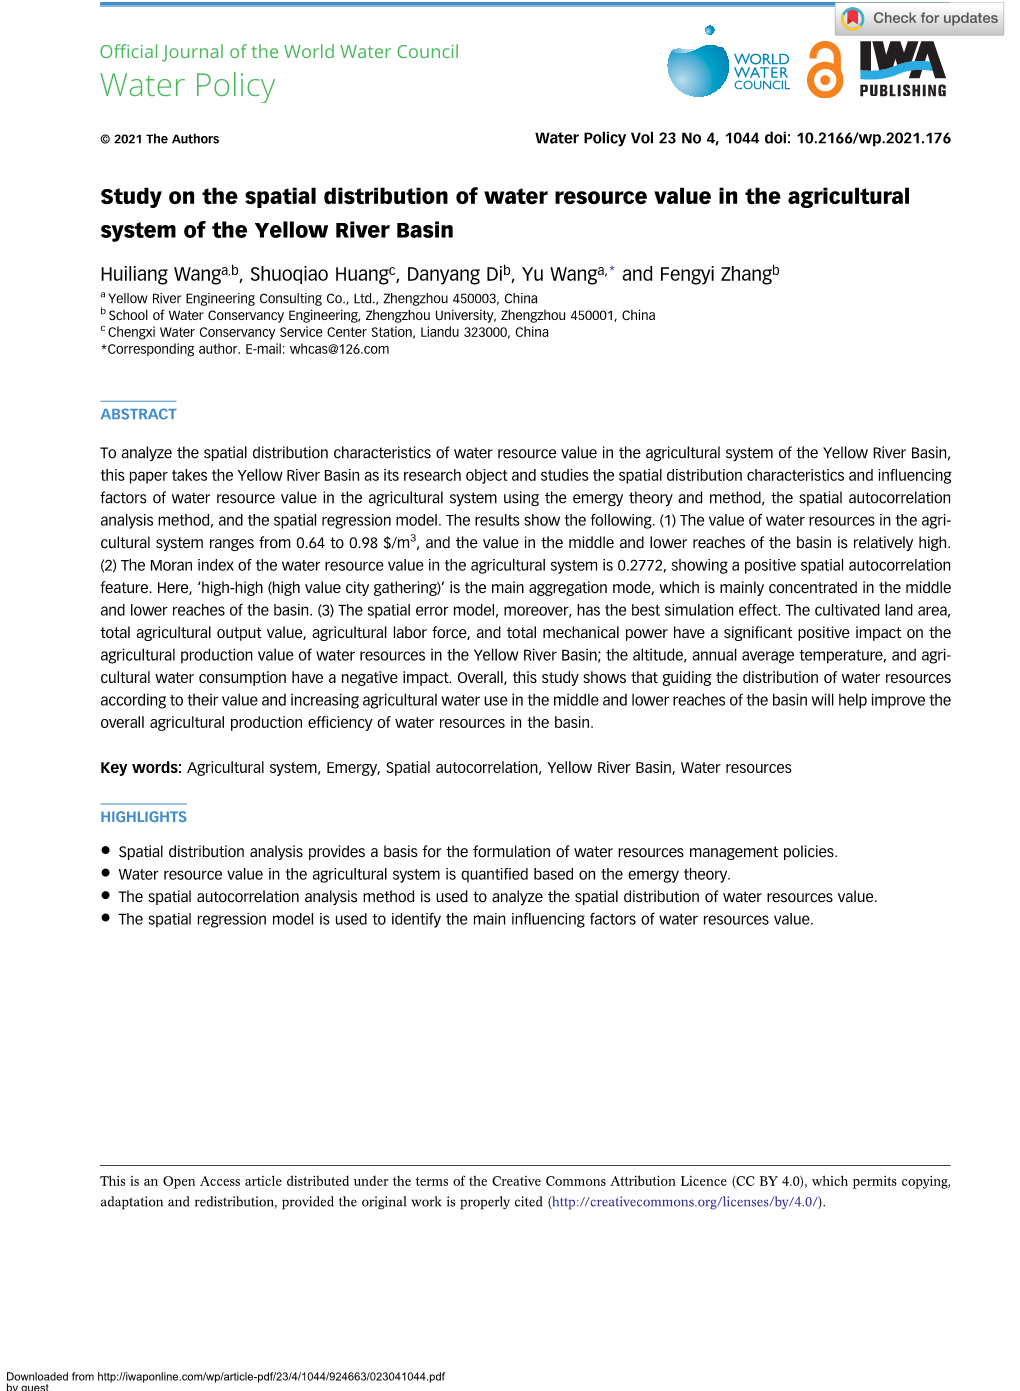 Study on the Spatial Distribution of Water Resource Value in the Agricultural System of the Yellow River Basin